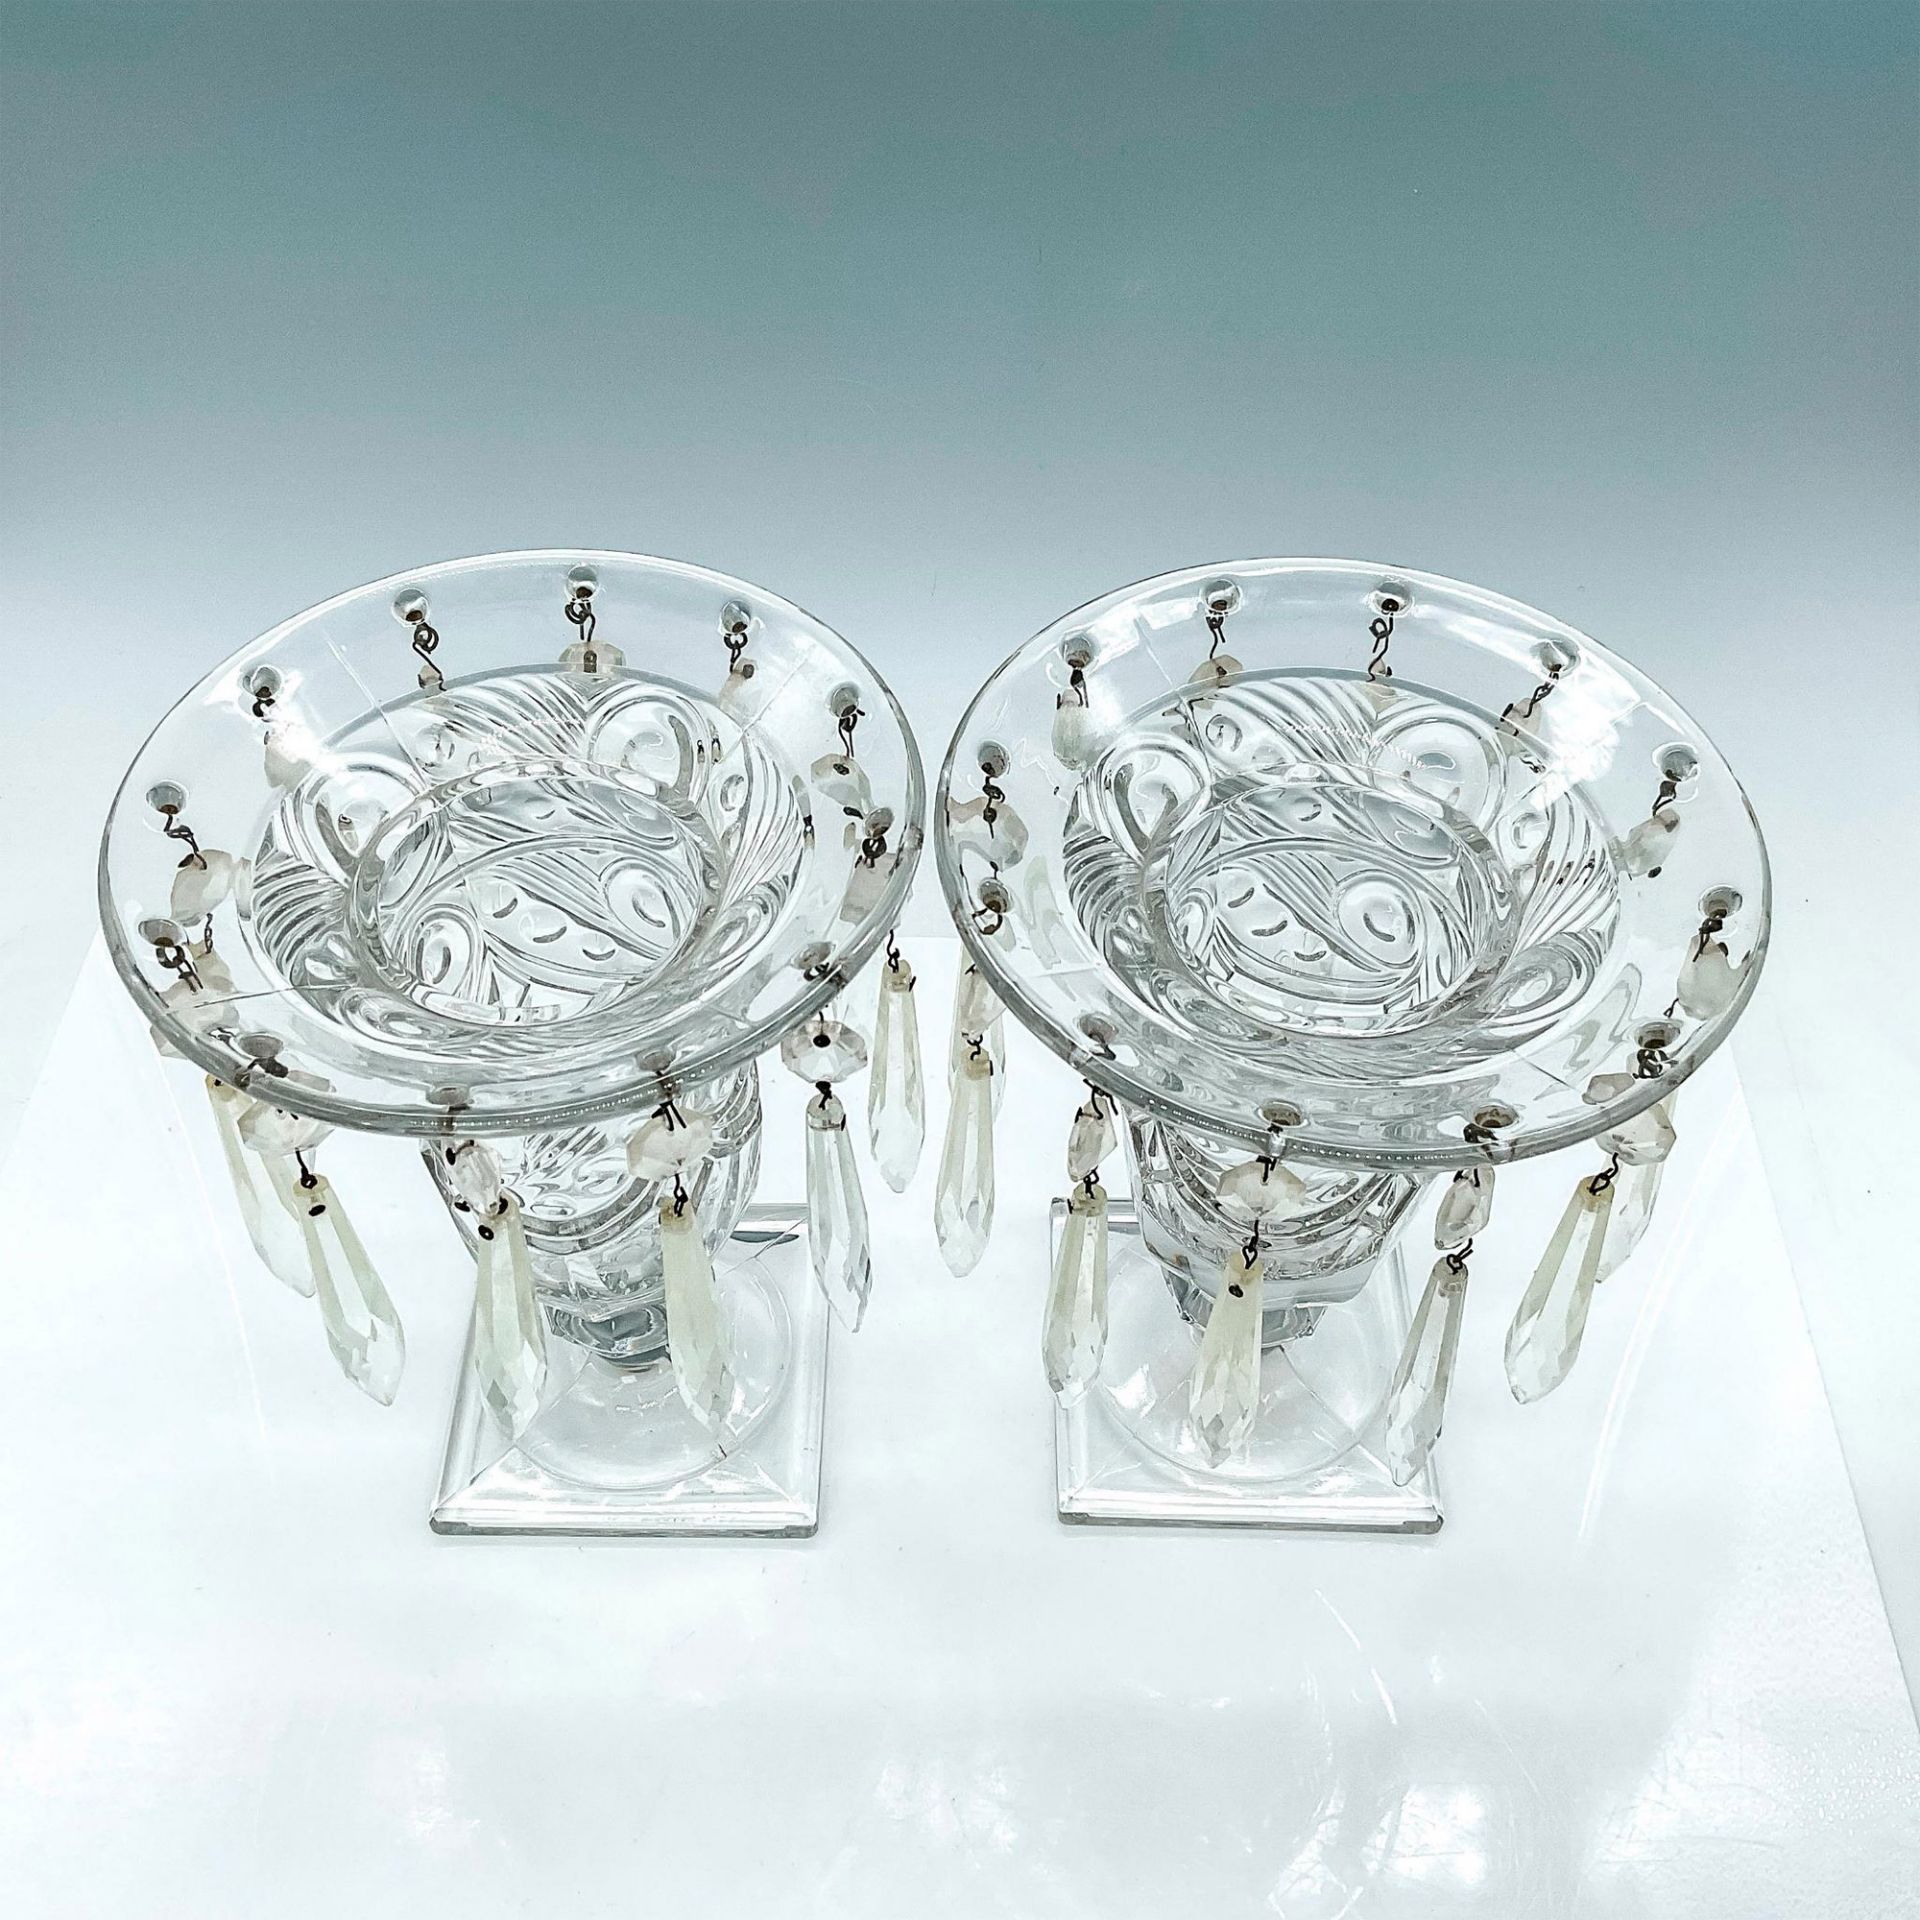 Pair of Heisey Ipswich Candle Centerpiece Vase with Prisms - Image 3 of 3